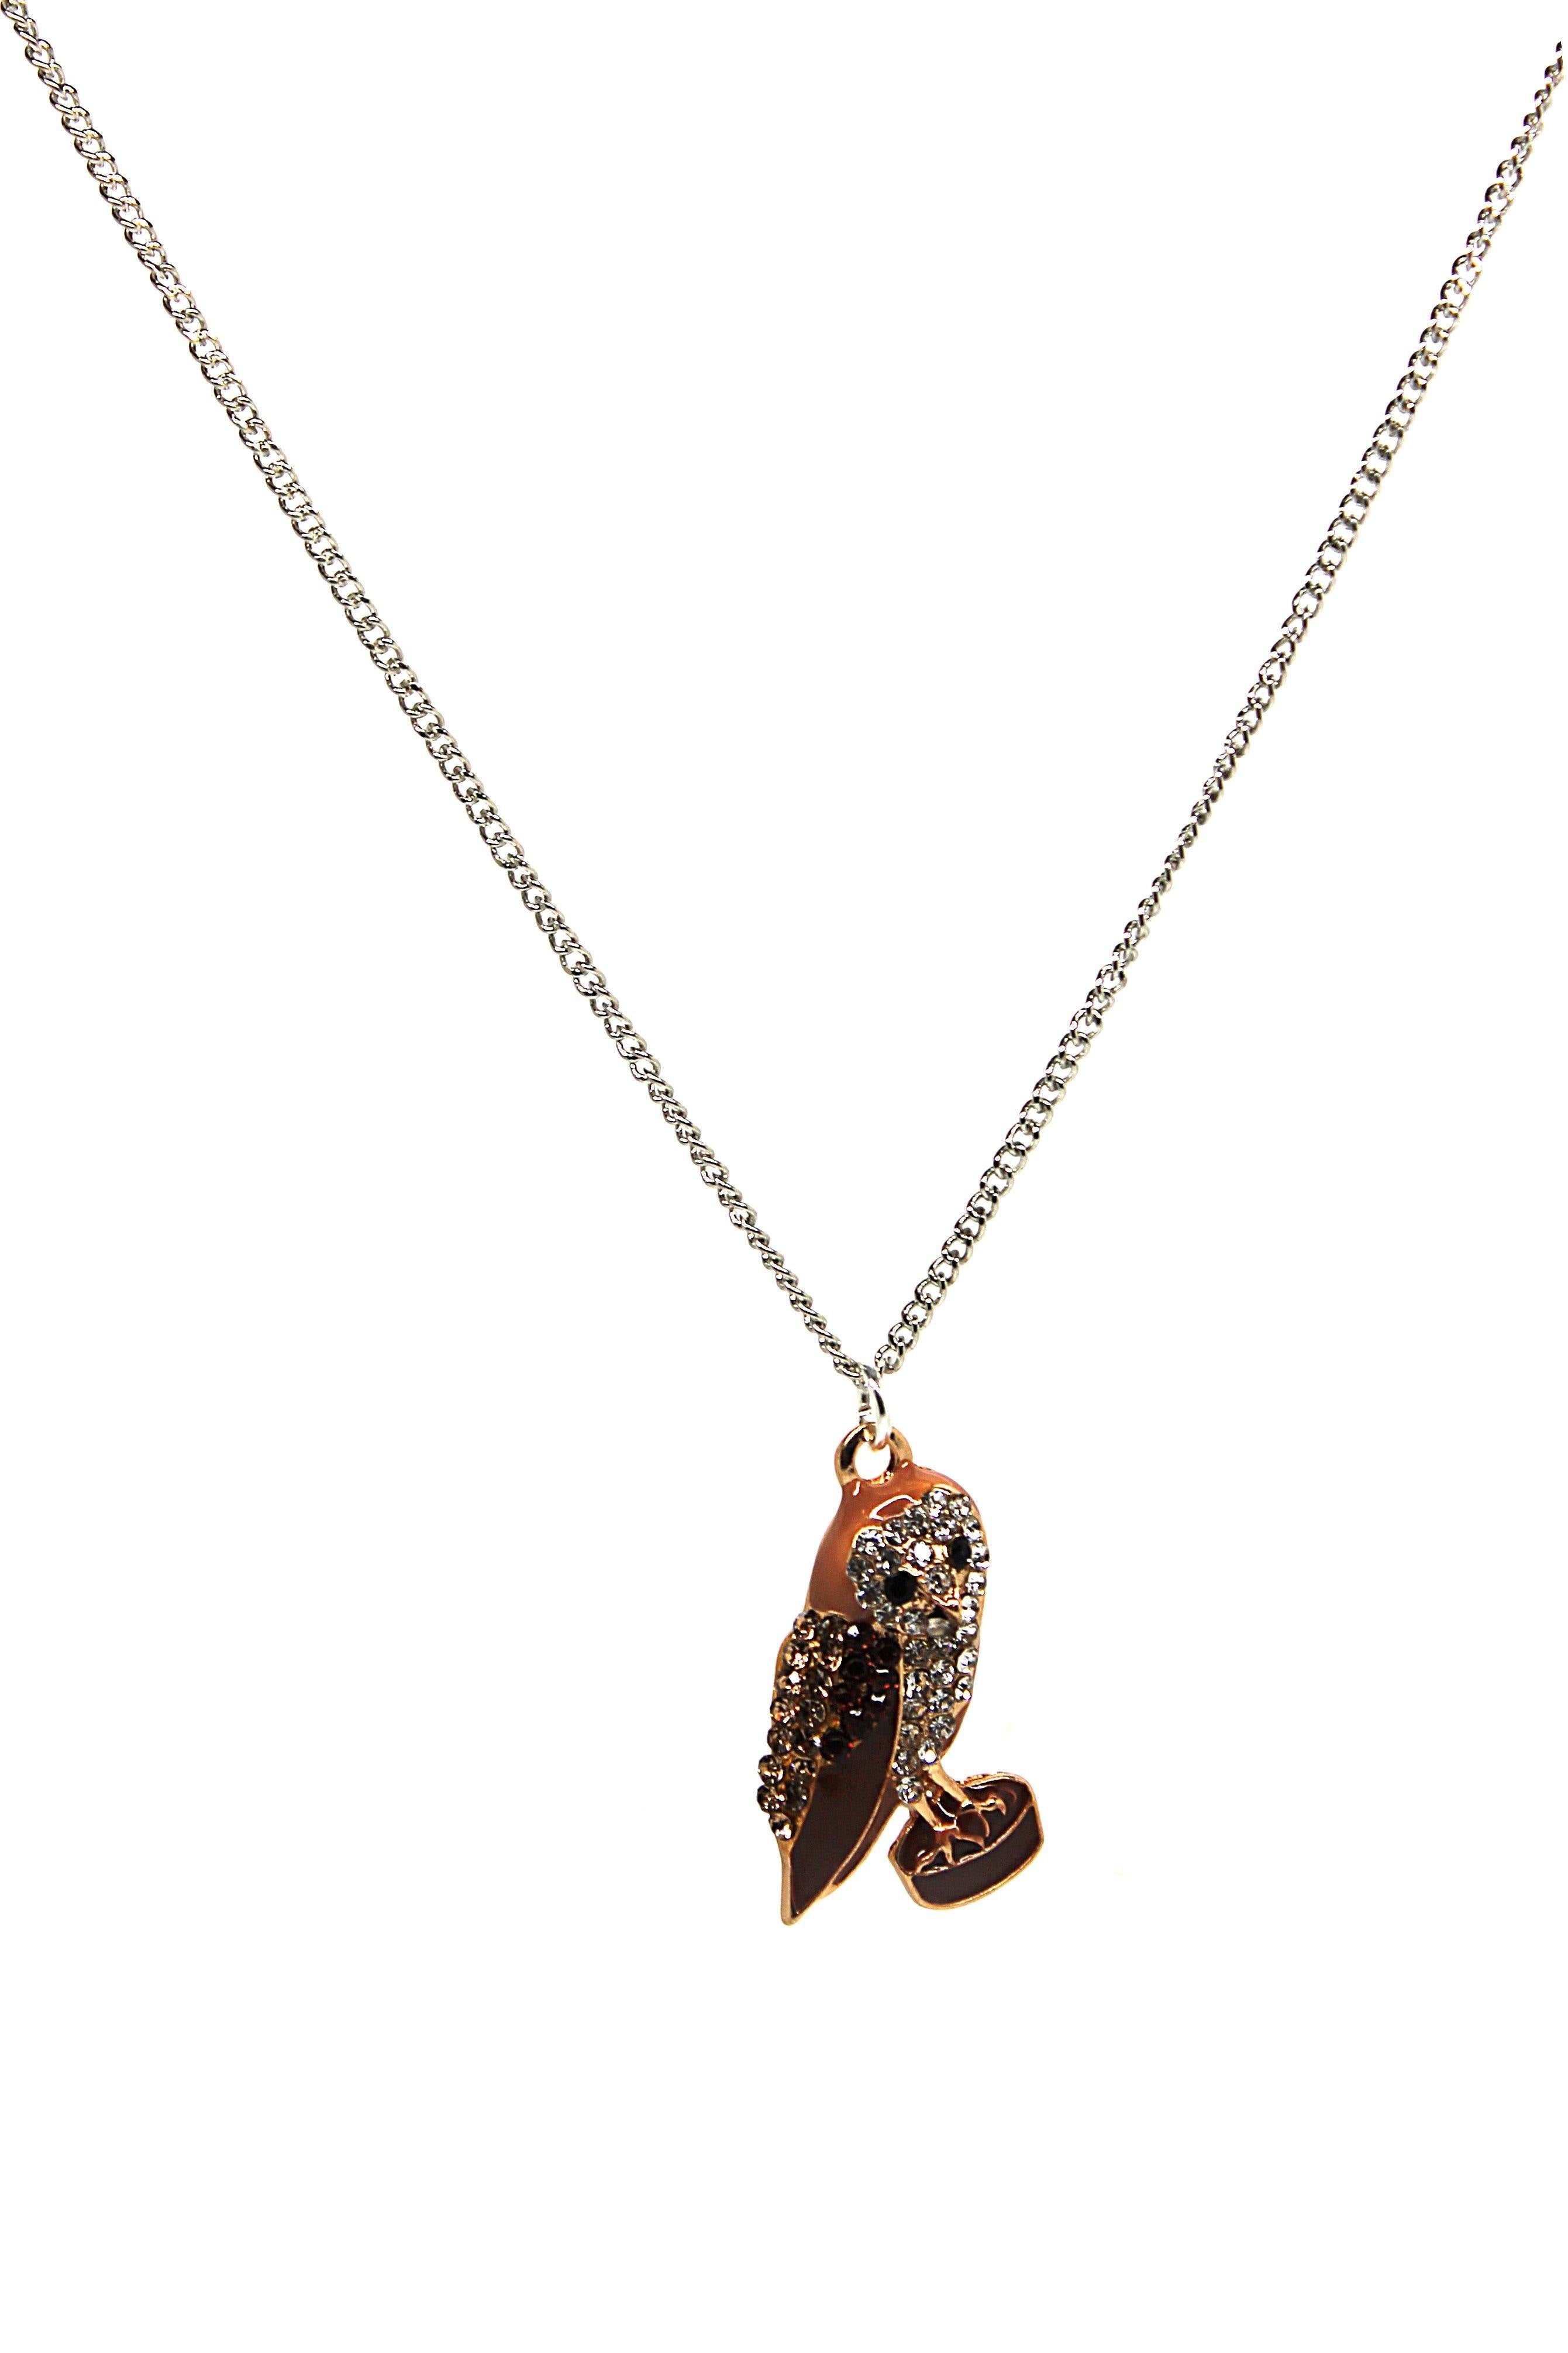 Owl Barn Necklace - Wildtouch - Wildtouch